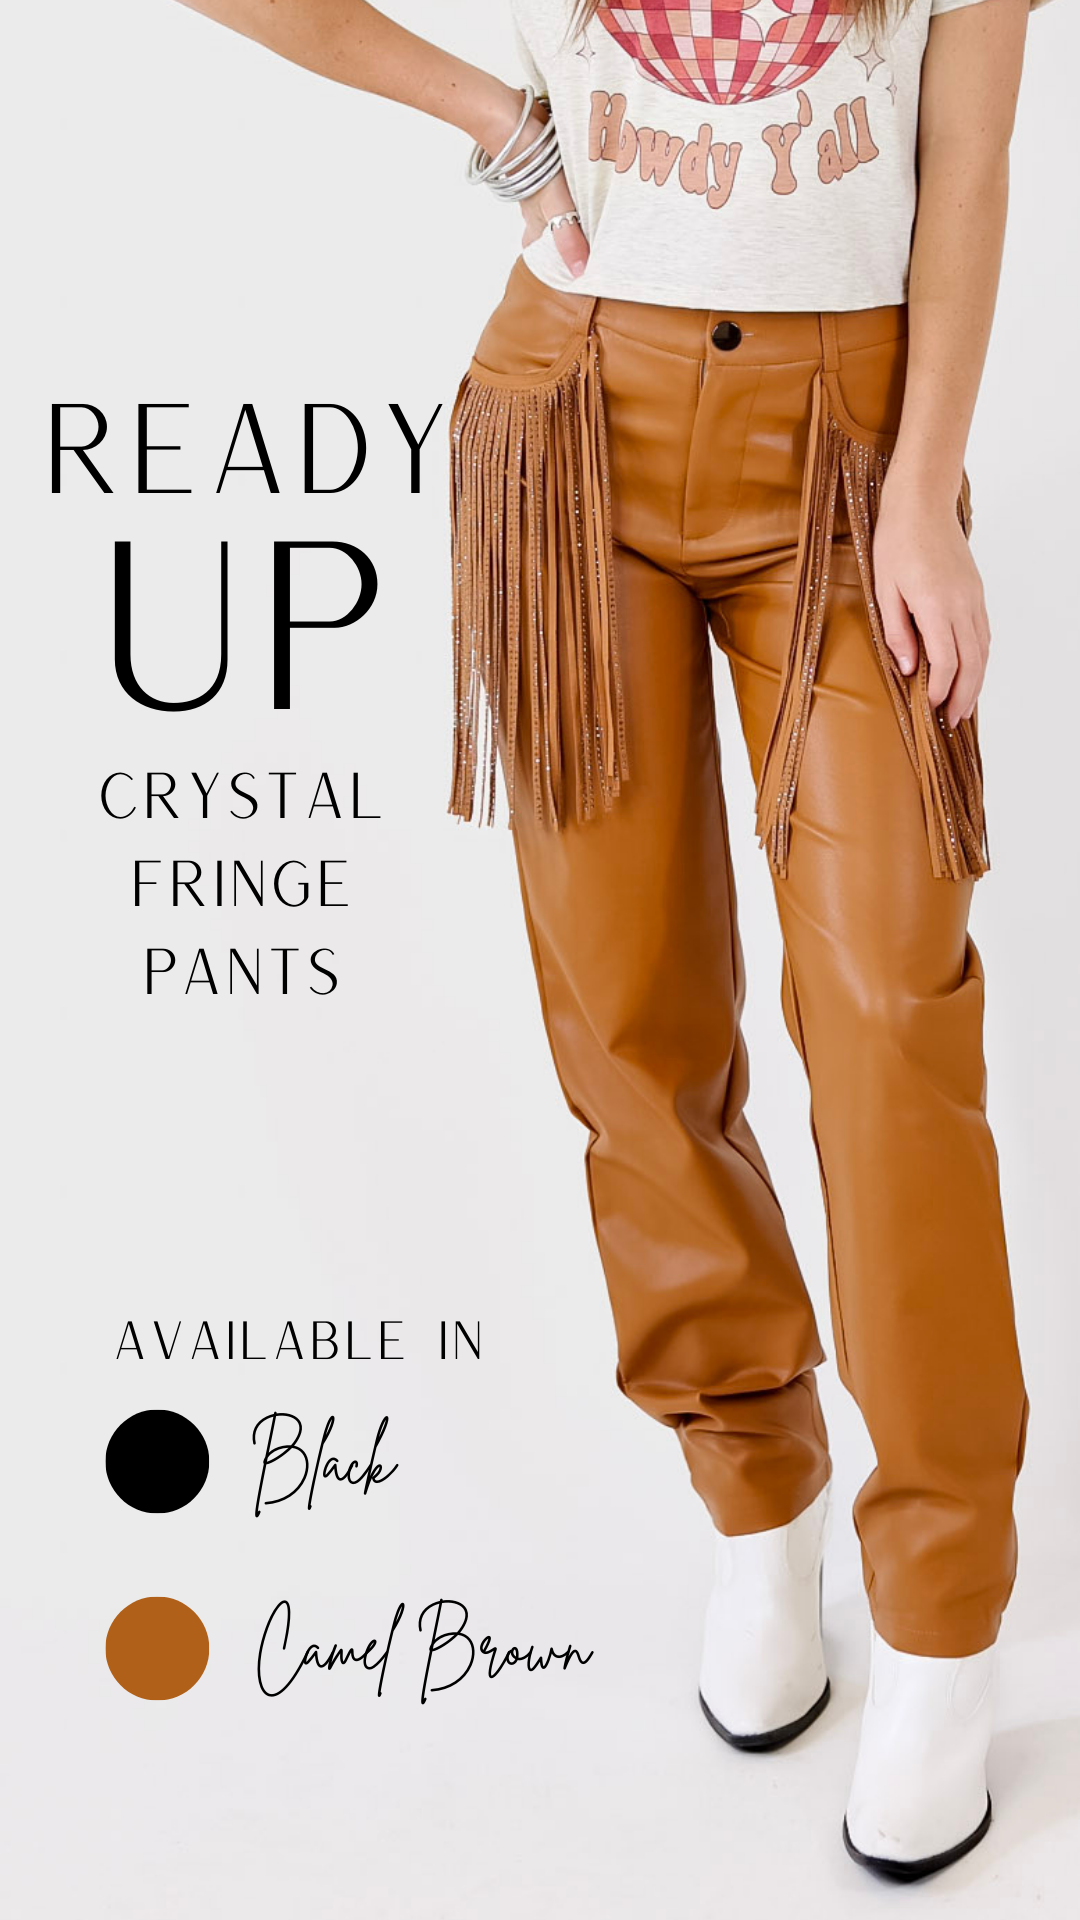 Ready Up Crystal Fringe Faux Leather Pants in Camel Brown